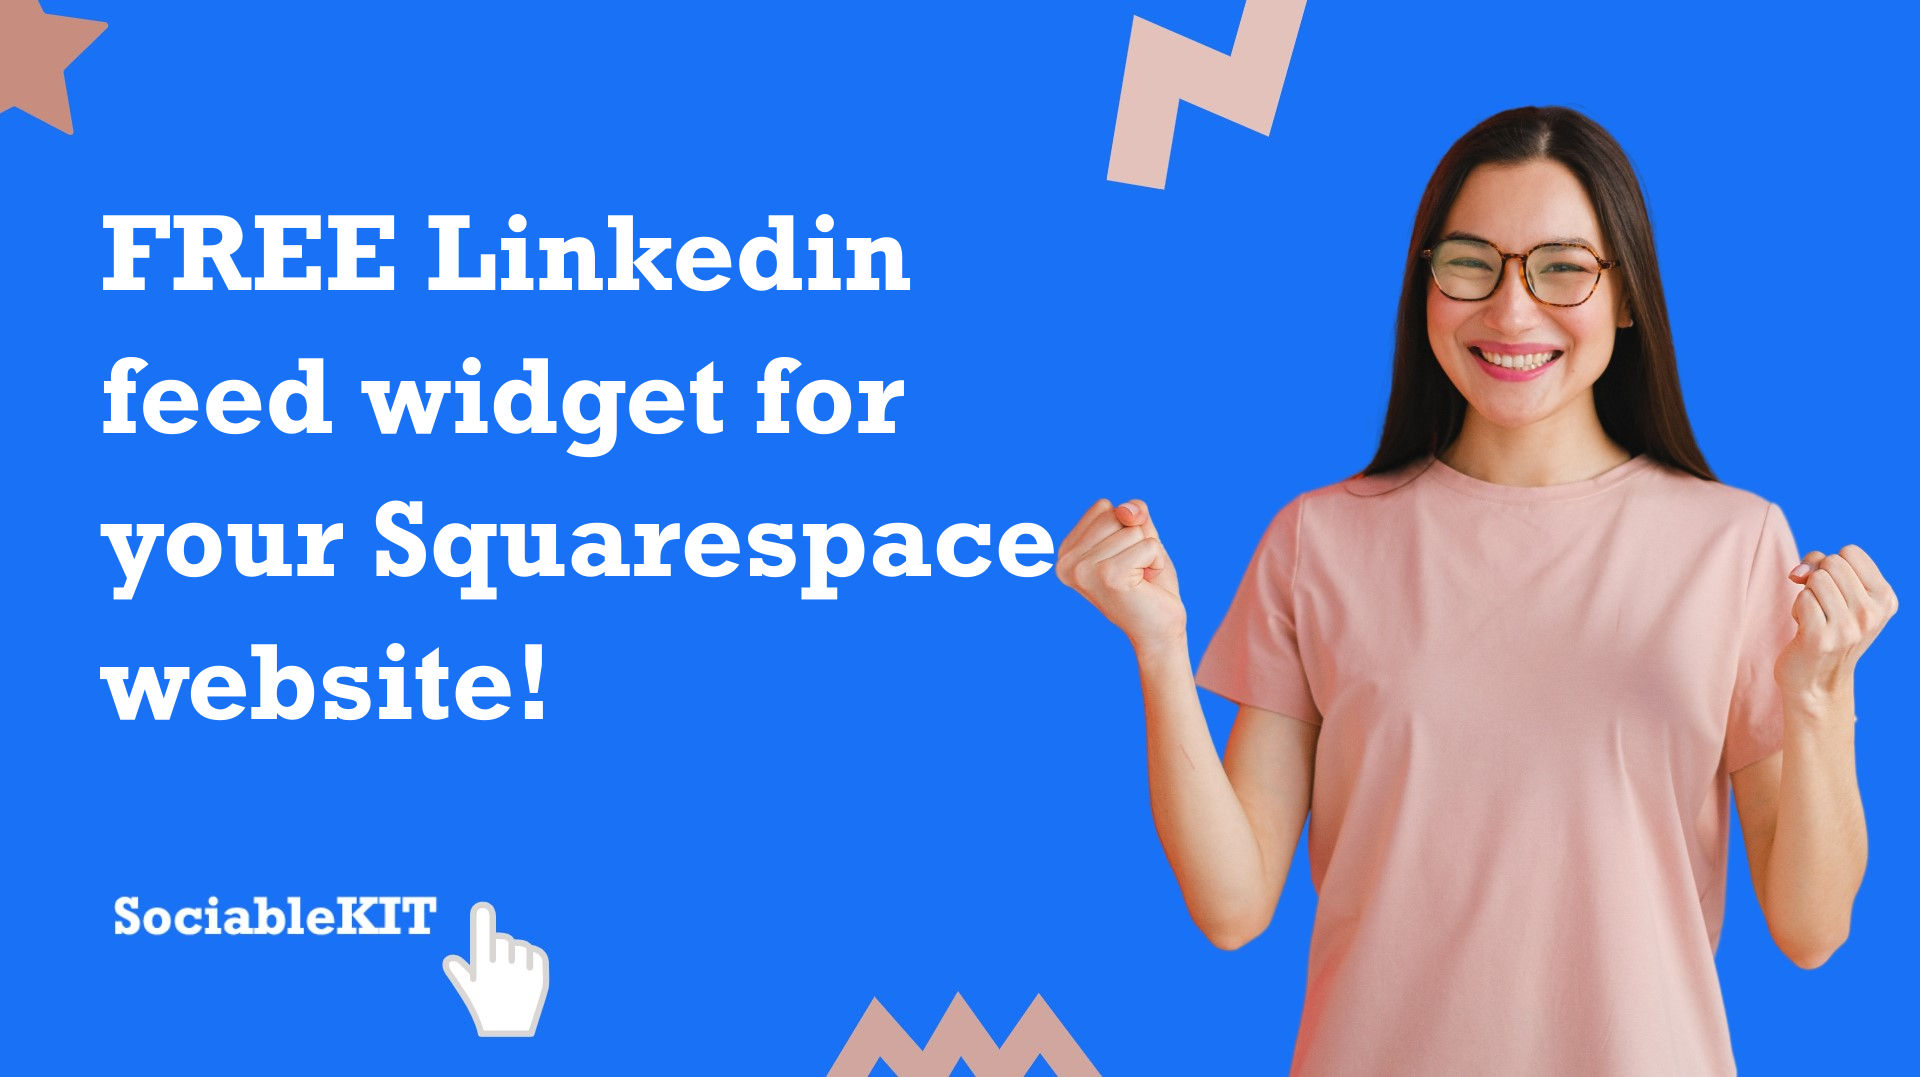 Free Linkedin feed widget for your Squarespace website